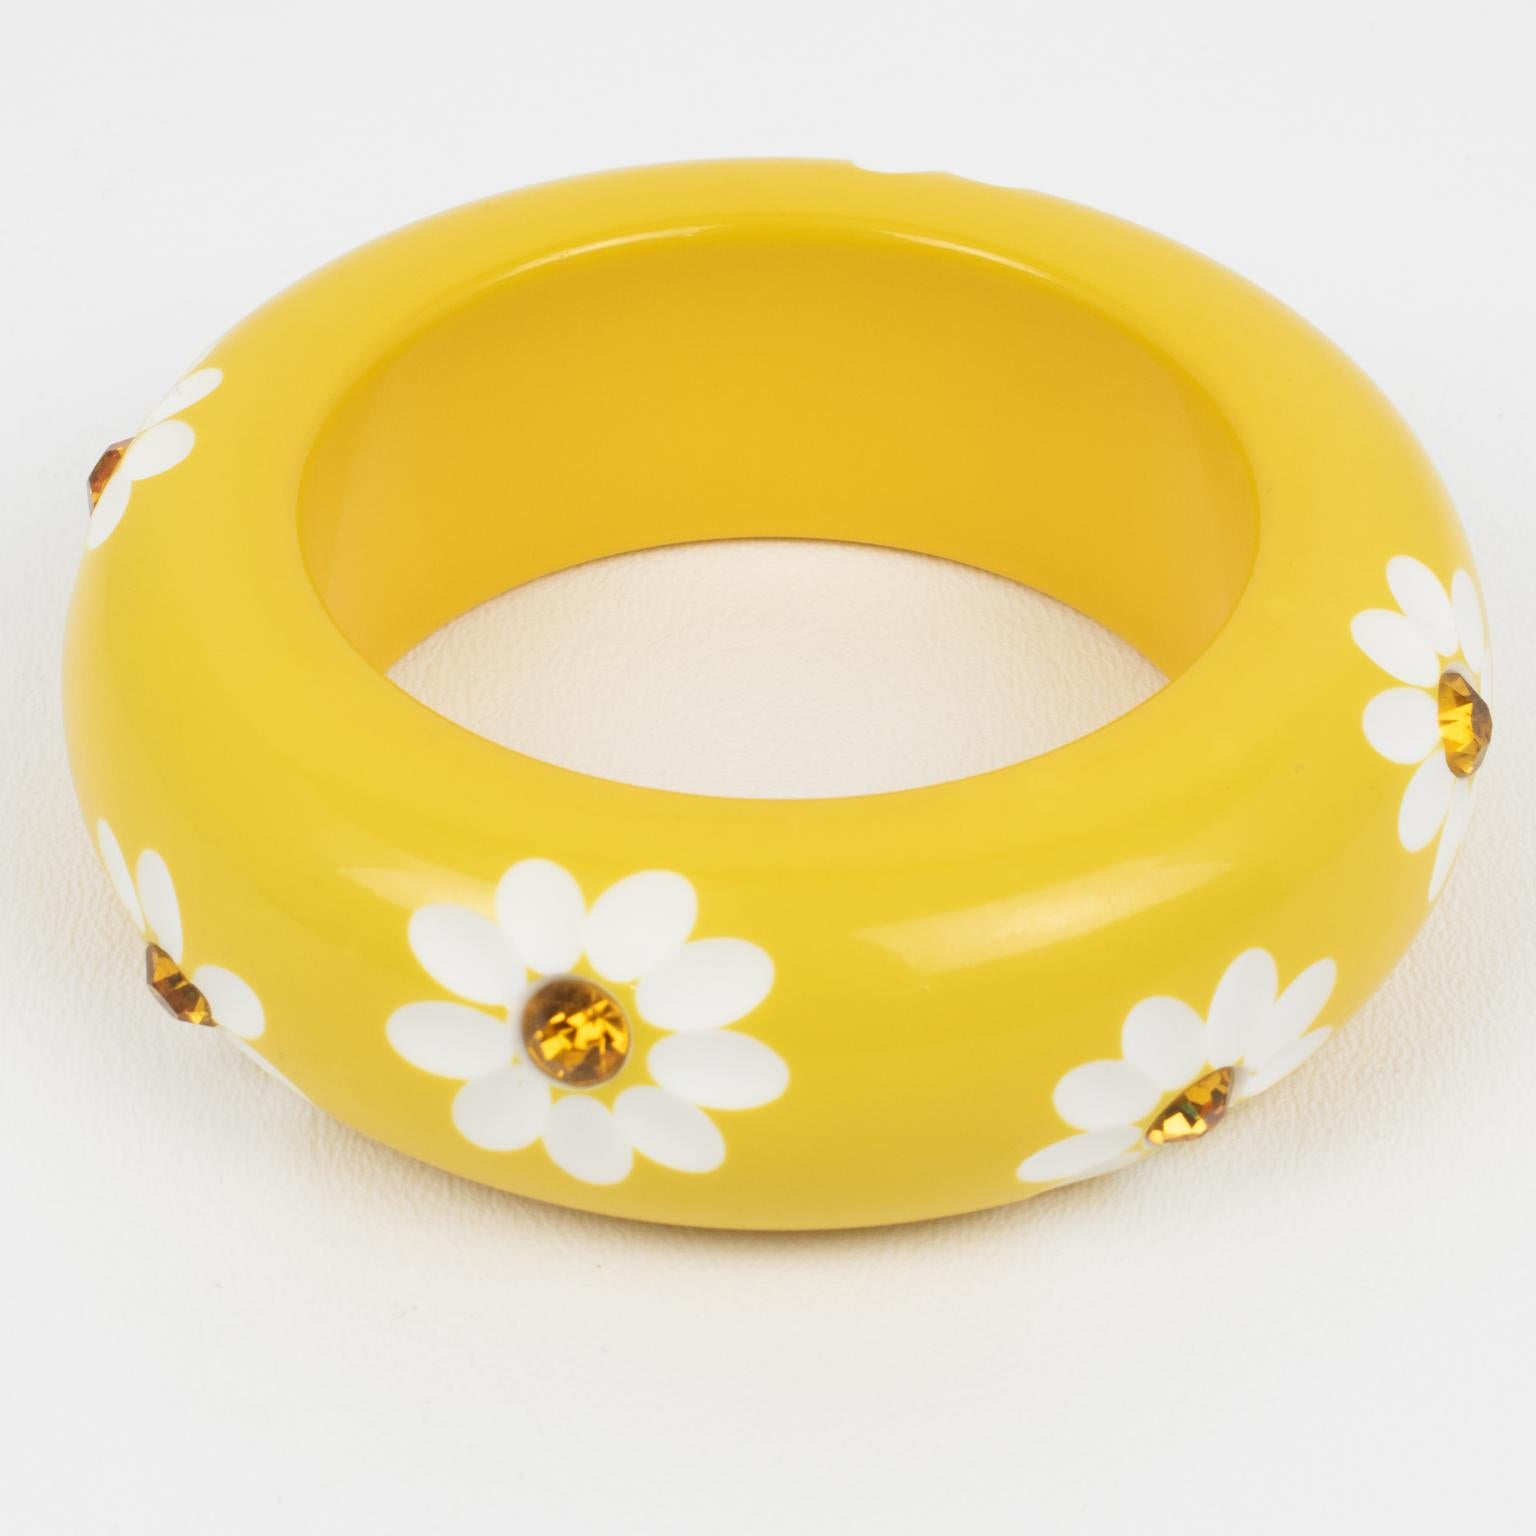 This striking Lucite bracelet bangle features a heavily domed massive shape in a bright yellow color. The bangle is ornate with daisy flowers carved design and orange topaz crystal rhinestones. There is no visible maker's mark.
Measurements: Inside